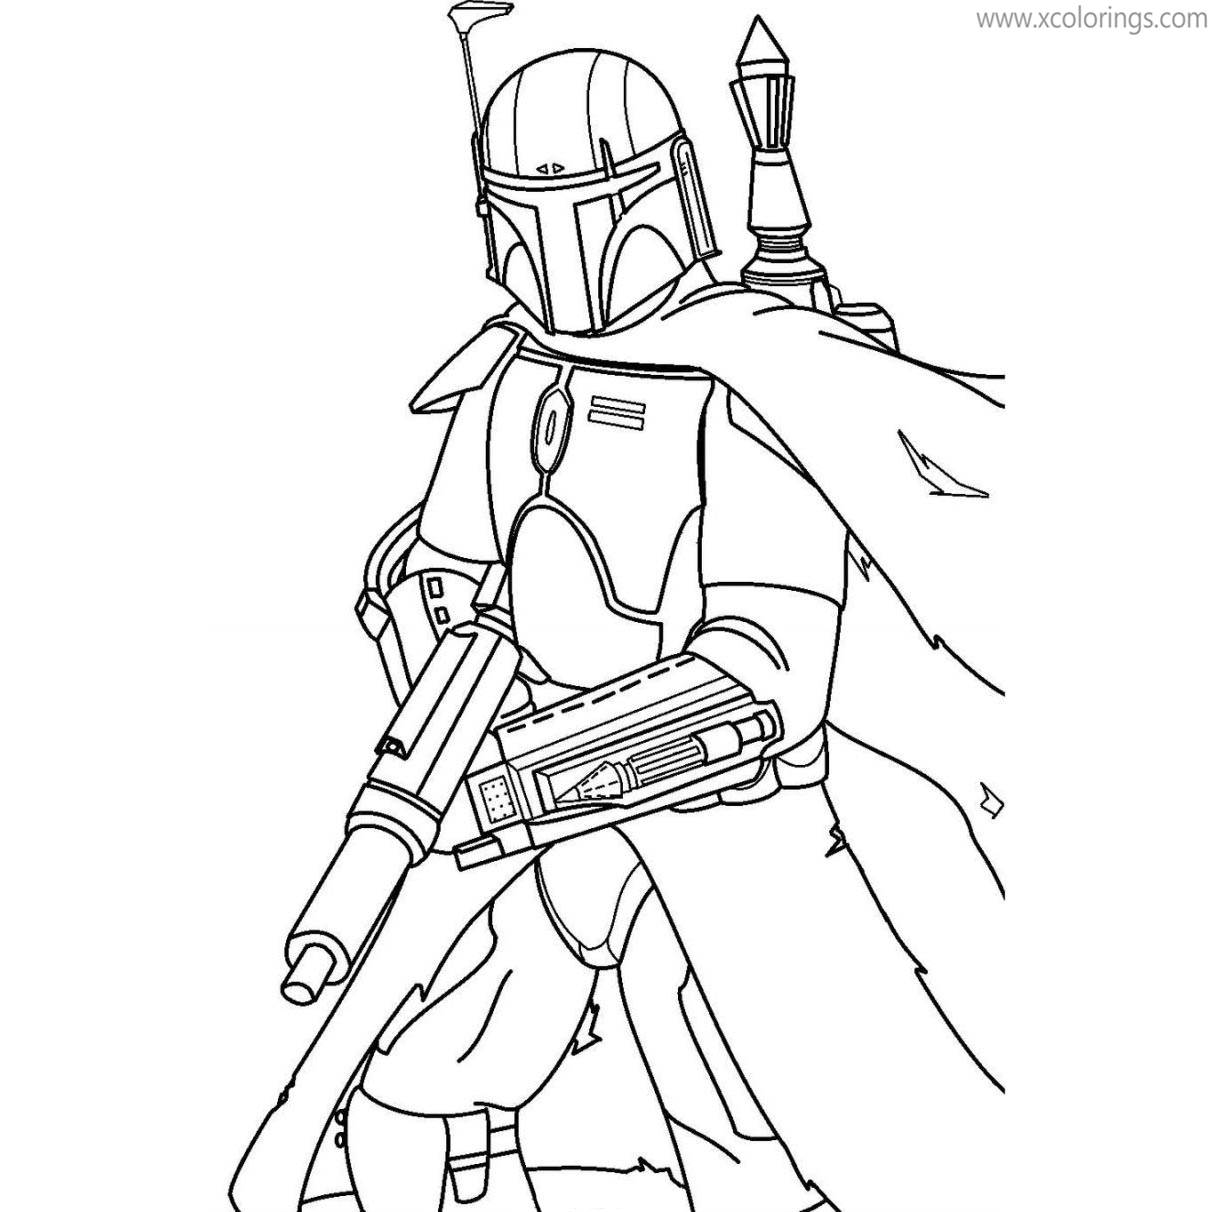 Free Boba Bett with Gun Coloring Pages printable